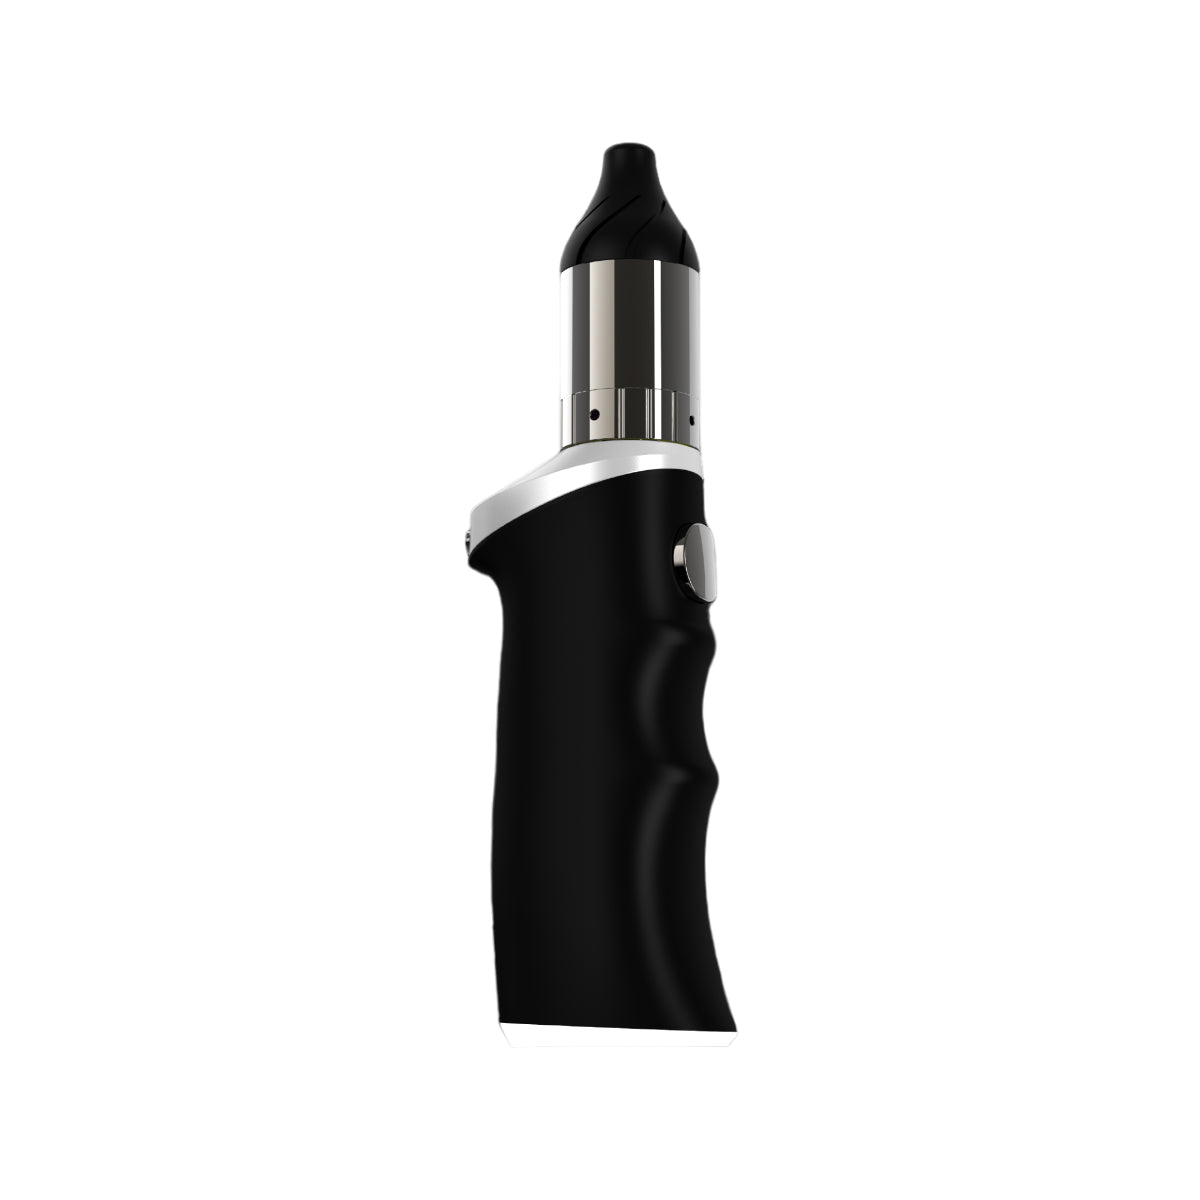 Yocan Black Phaser Ace Wax Vaporizer - silver